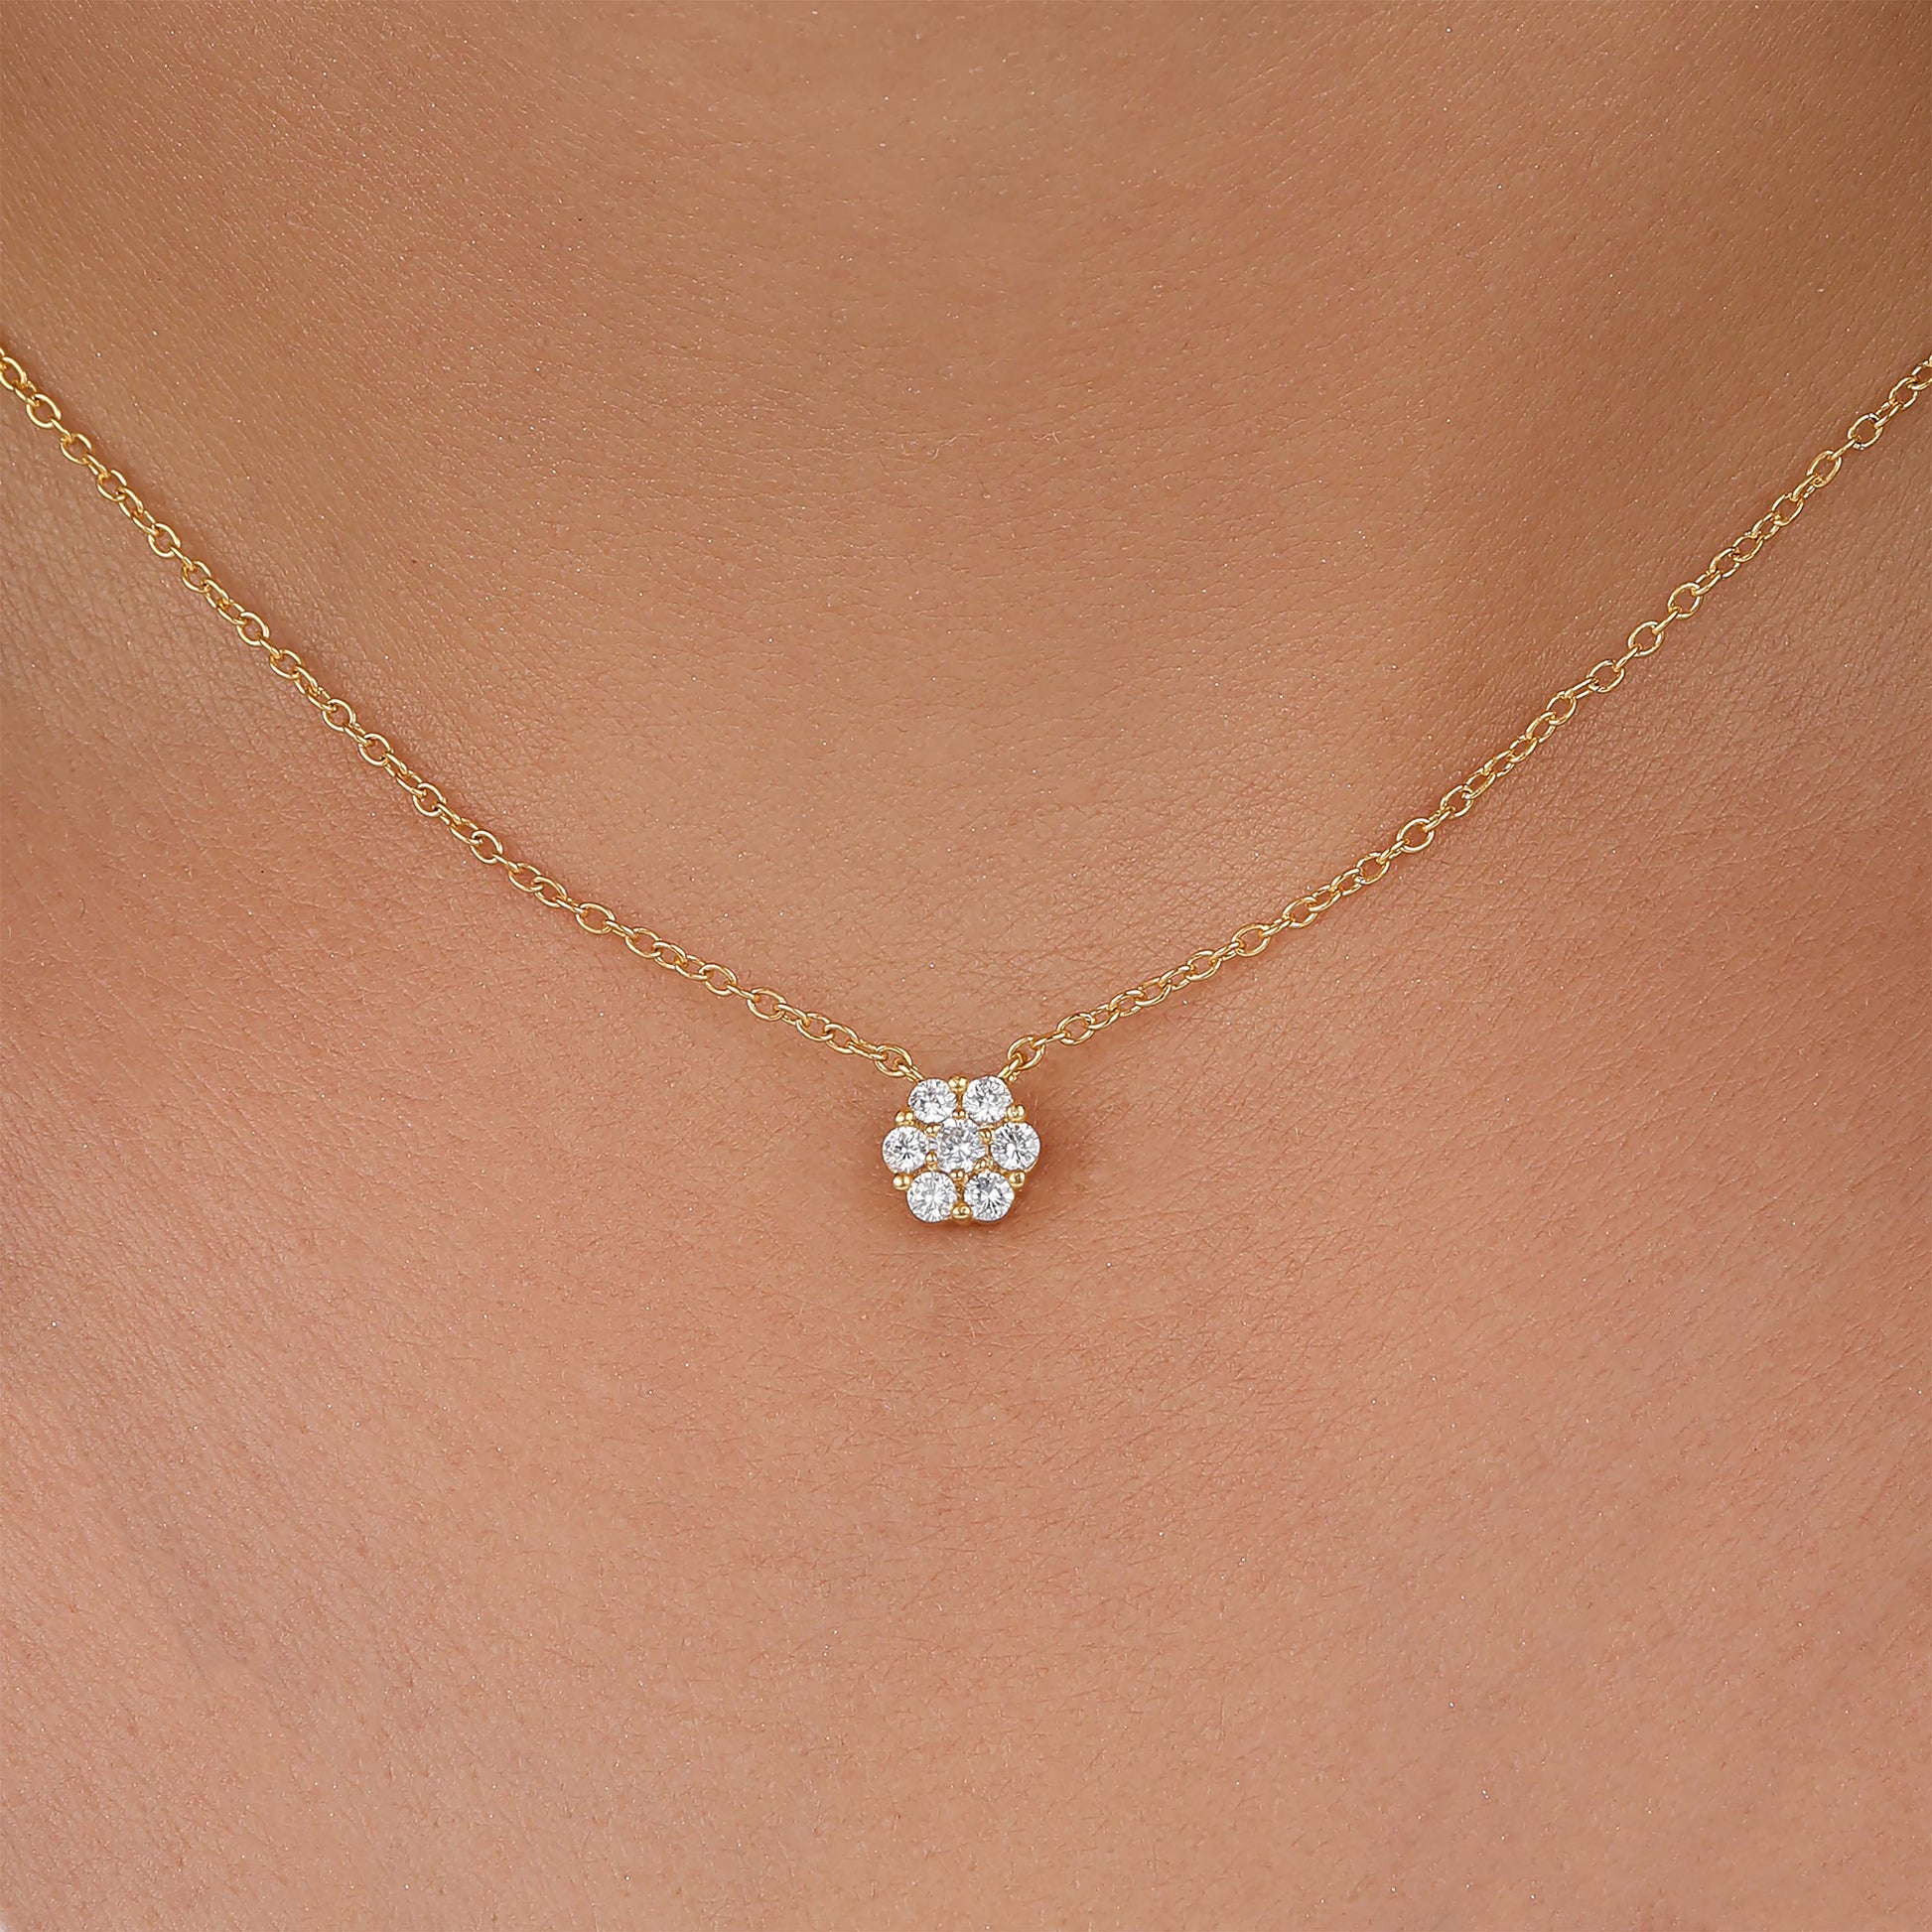 flowers necklace with 7 cluster moissanite